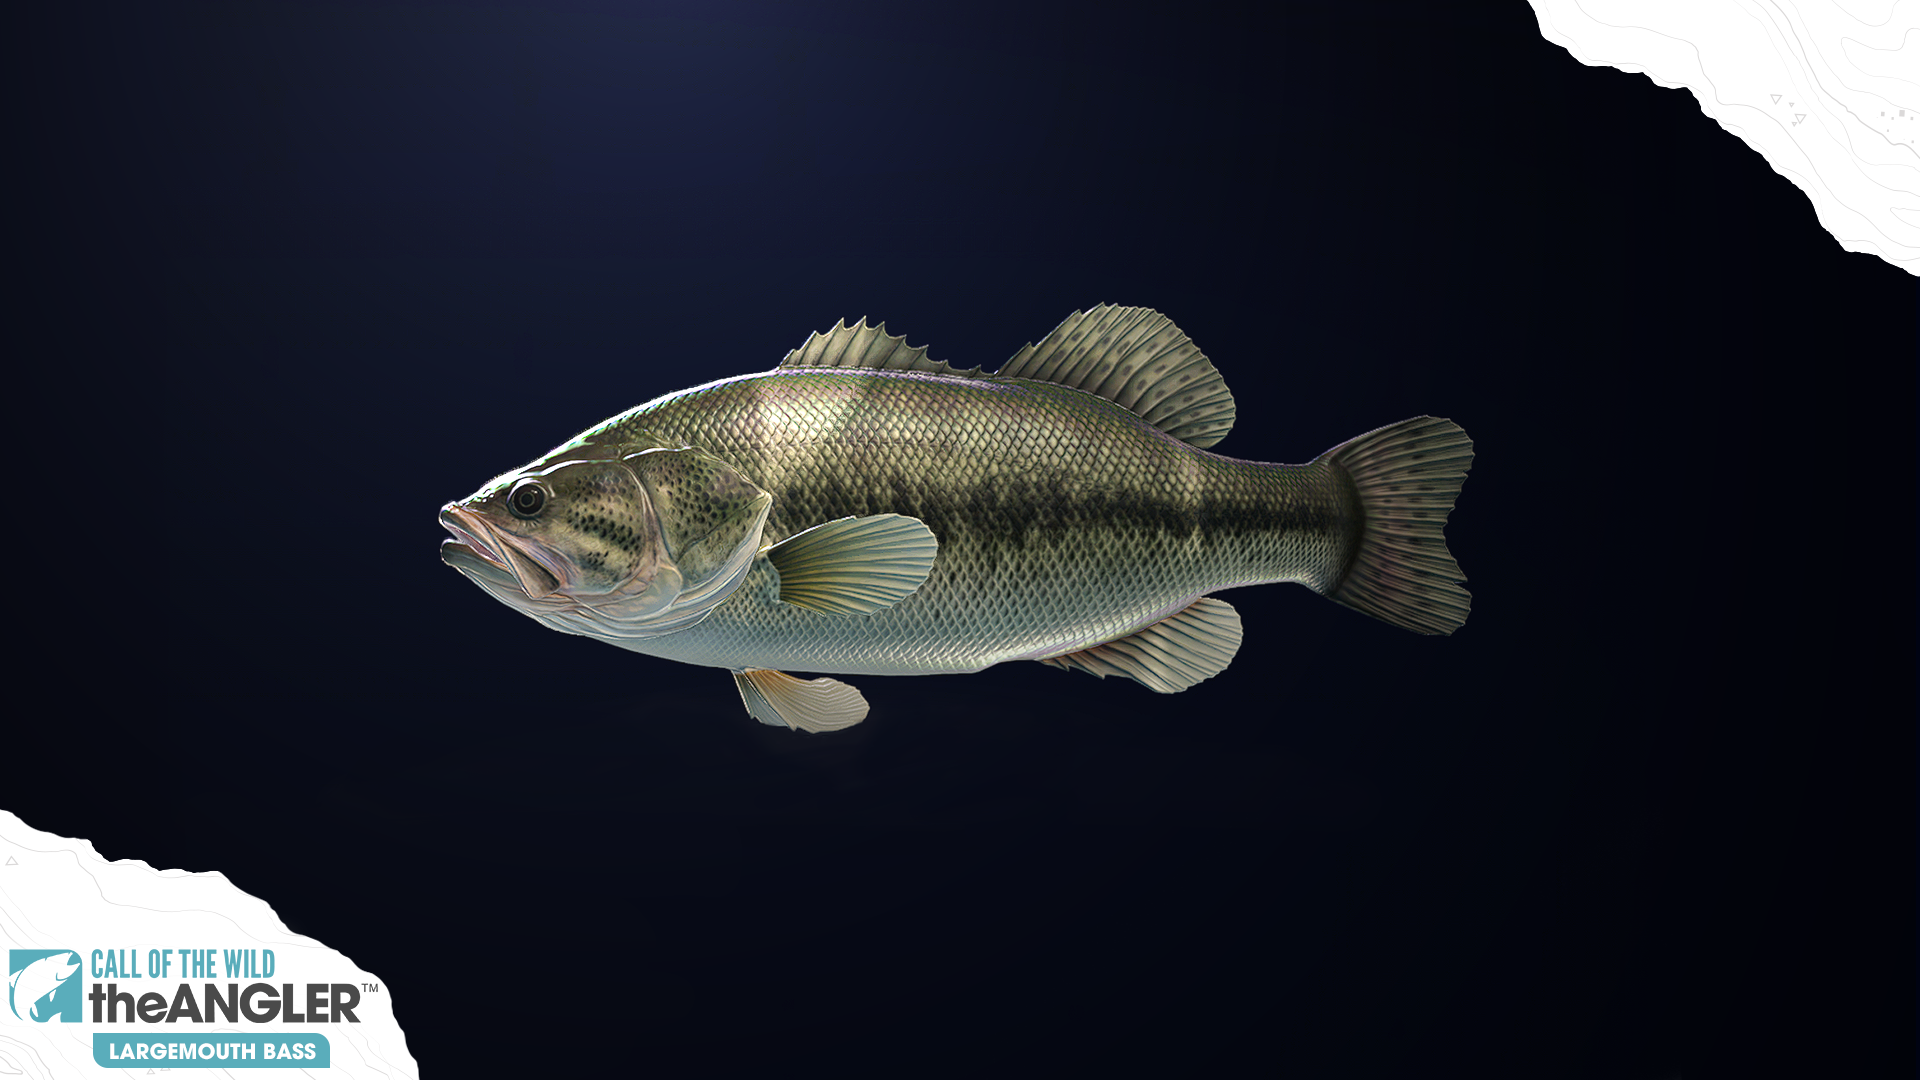 An image of the fish species, Largemouth Bass.